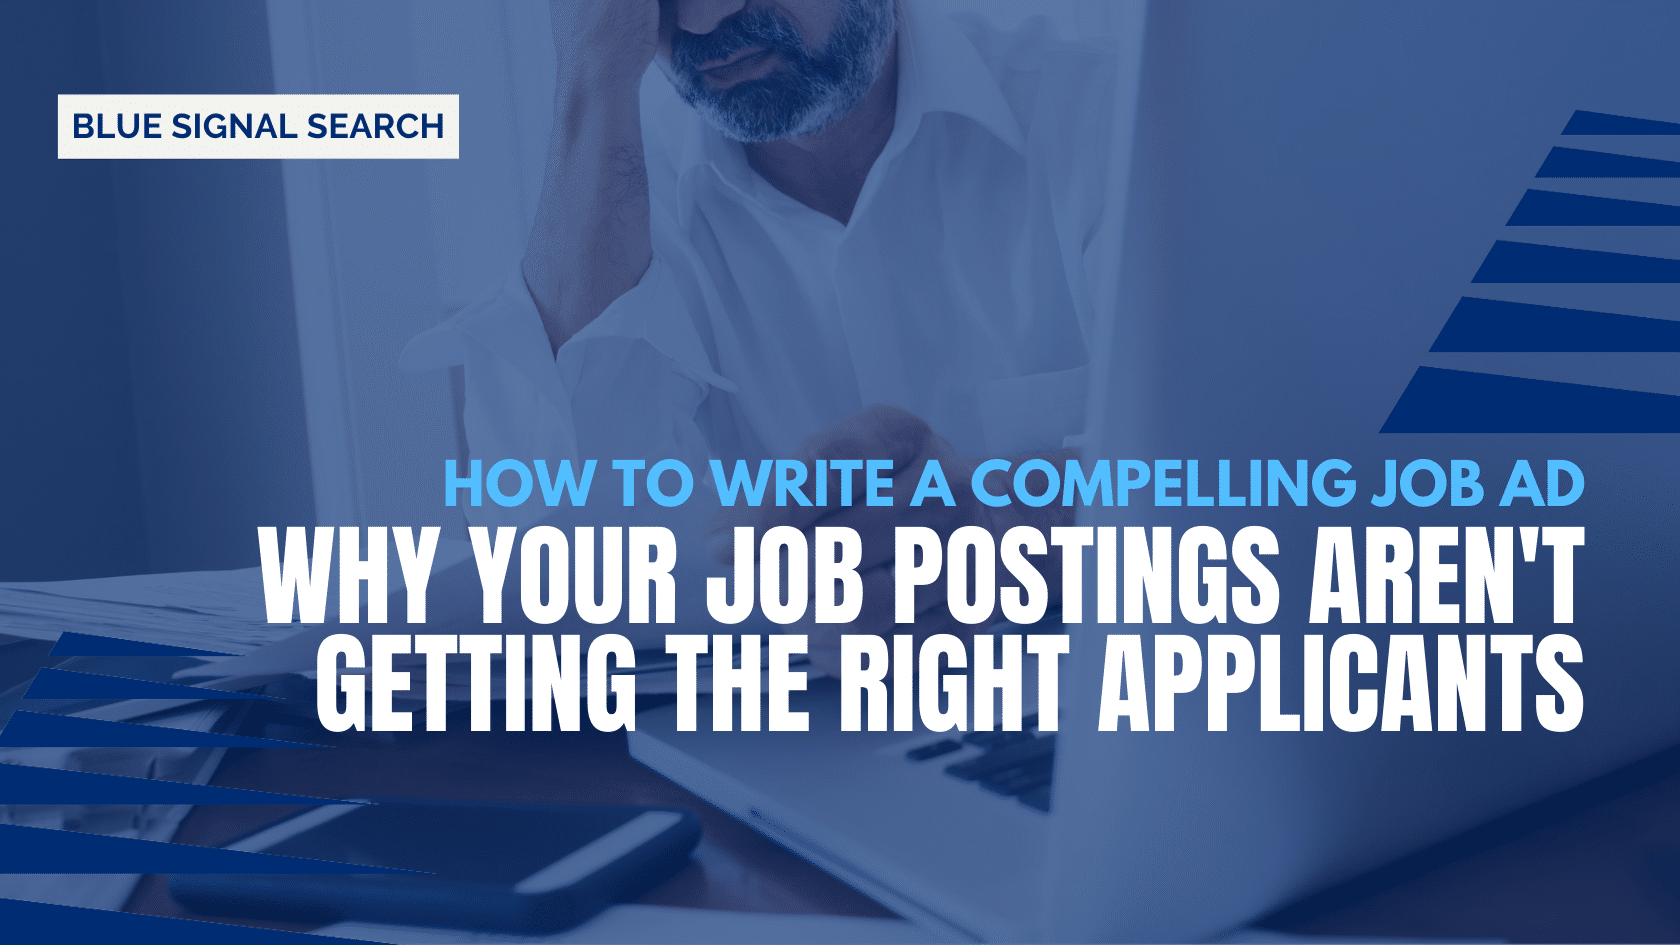 Why Your Job Postings aren't Getting the Right Applicants - Blue Signal